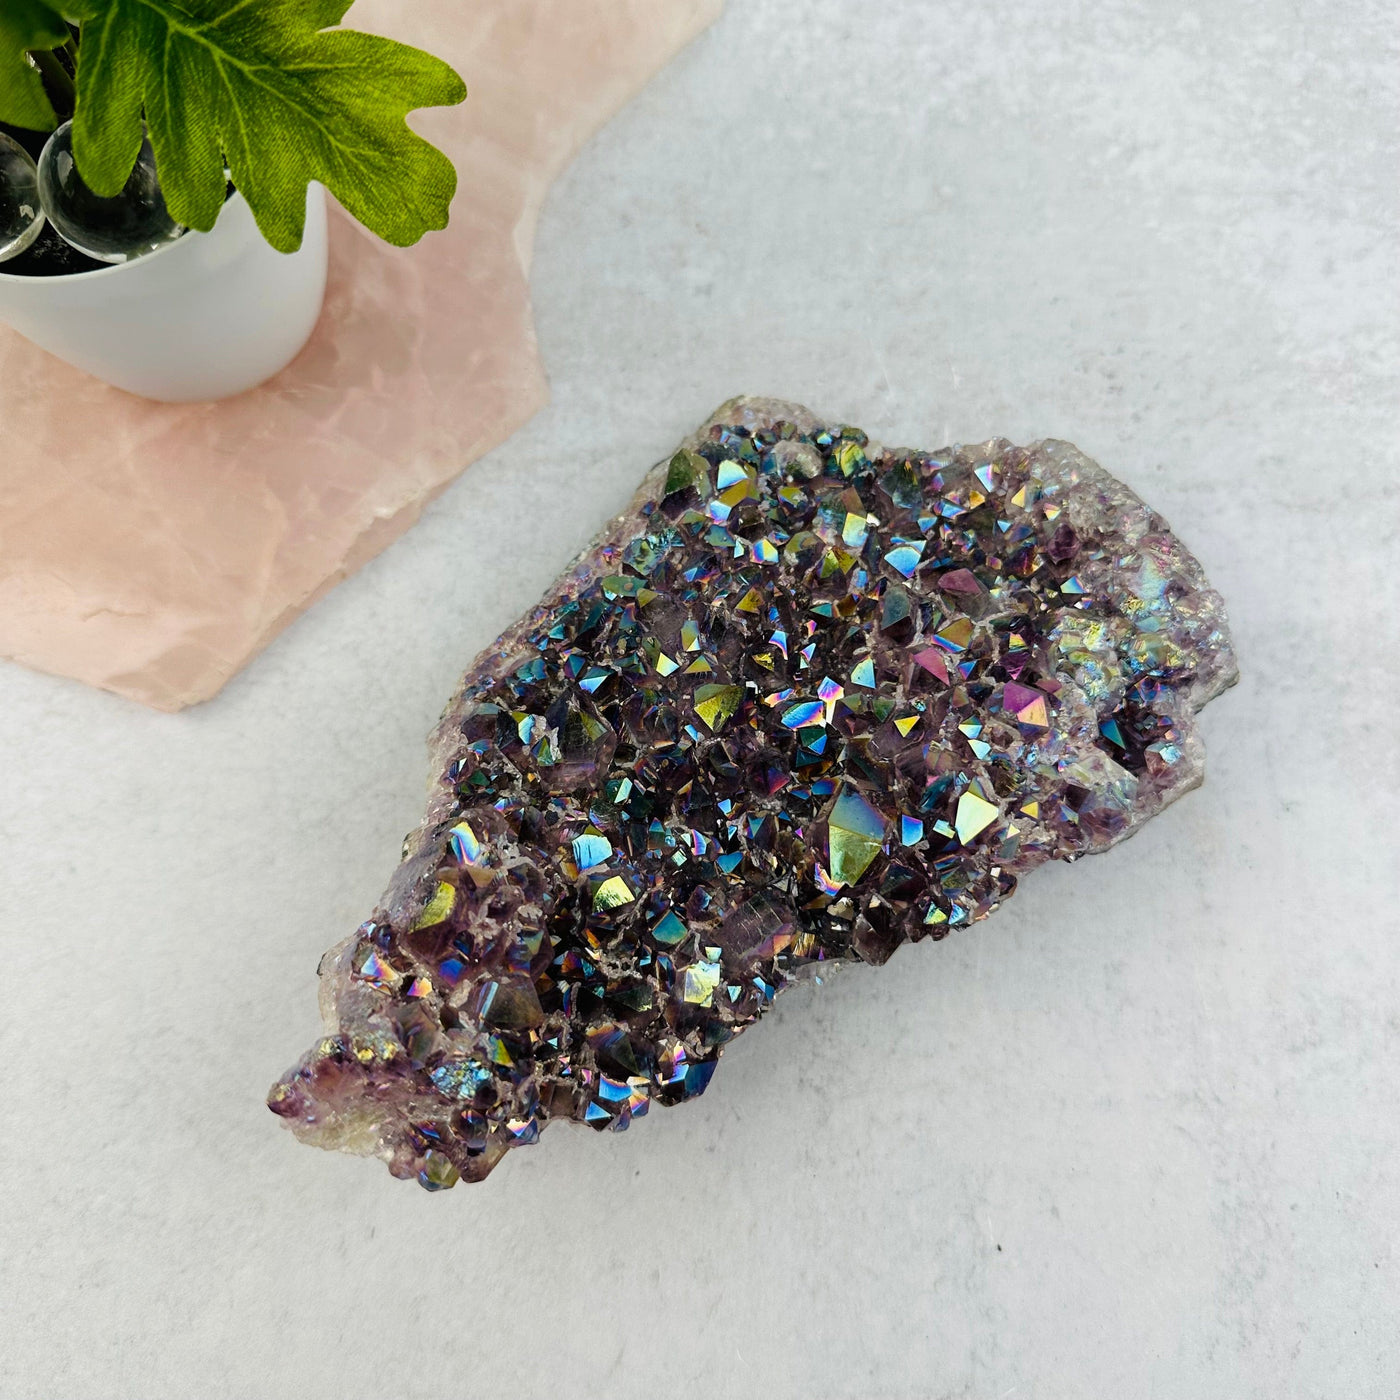 Amethyst Druzy Crystal Cluster with Angel Aura Pearly Finish displayed as home decor 